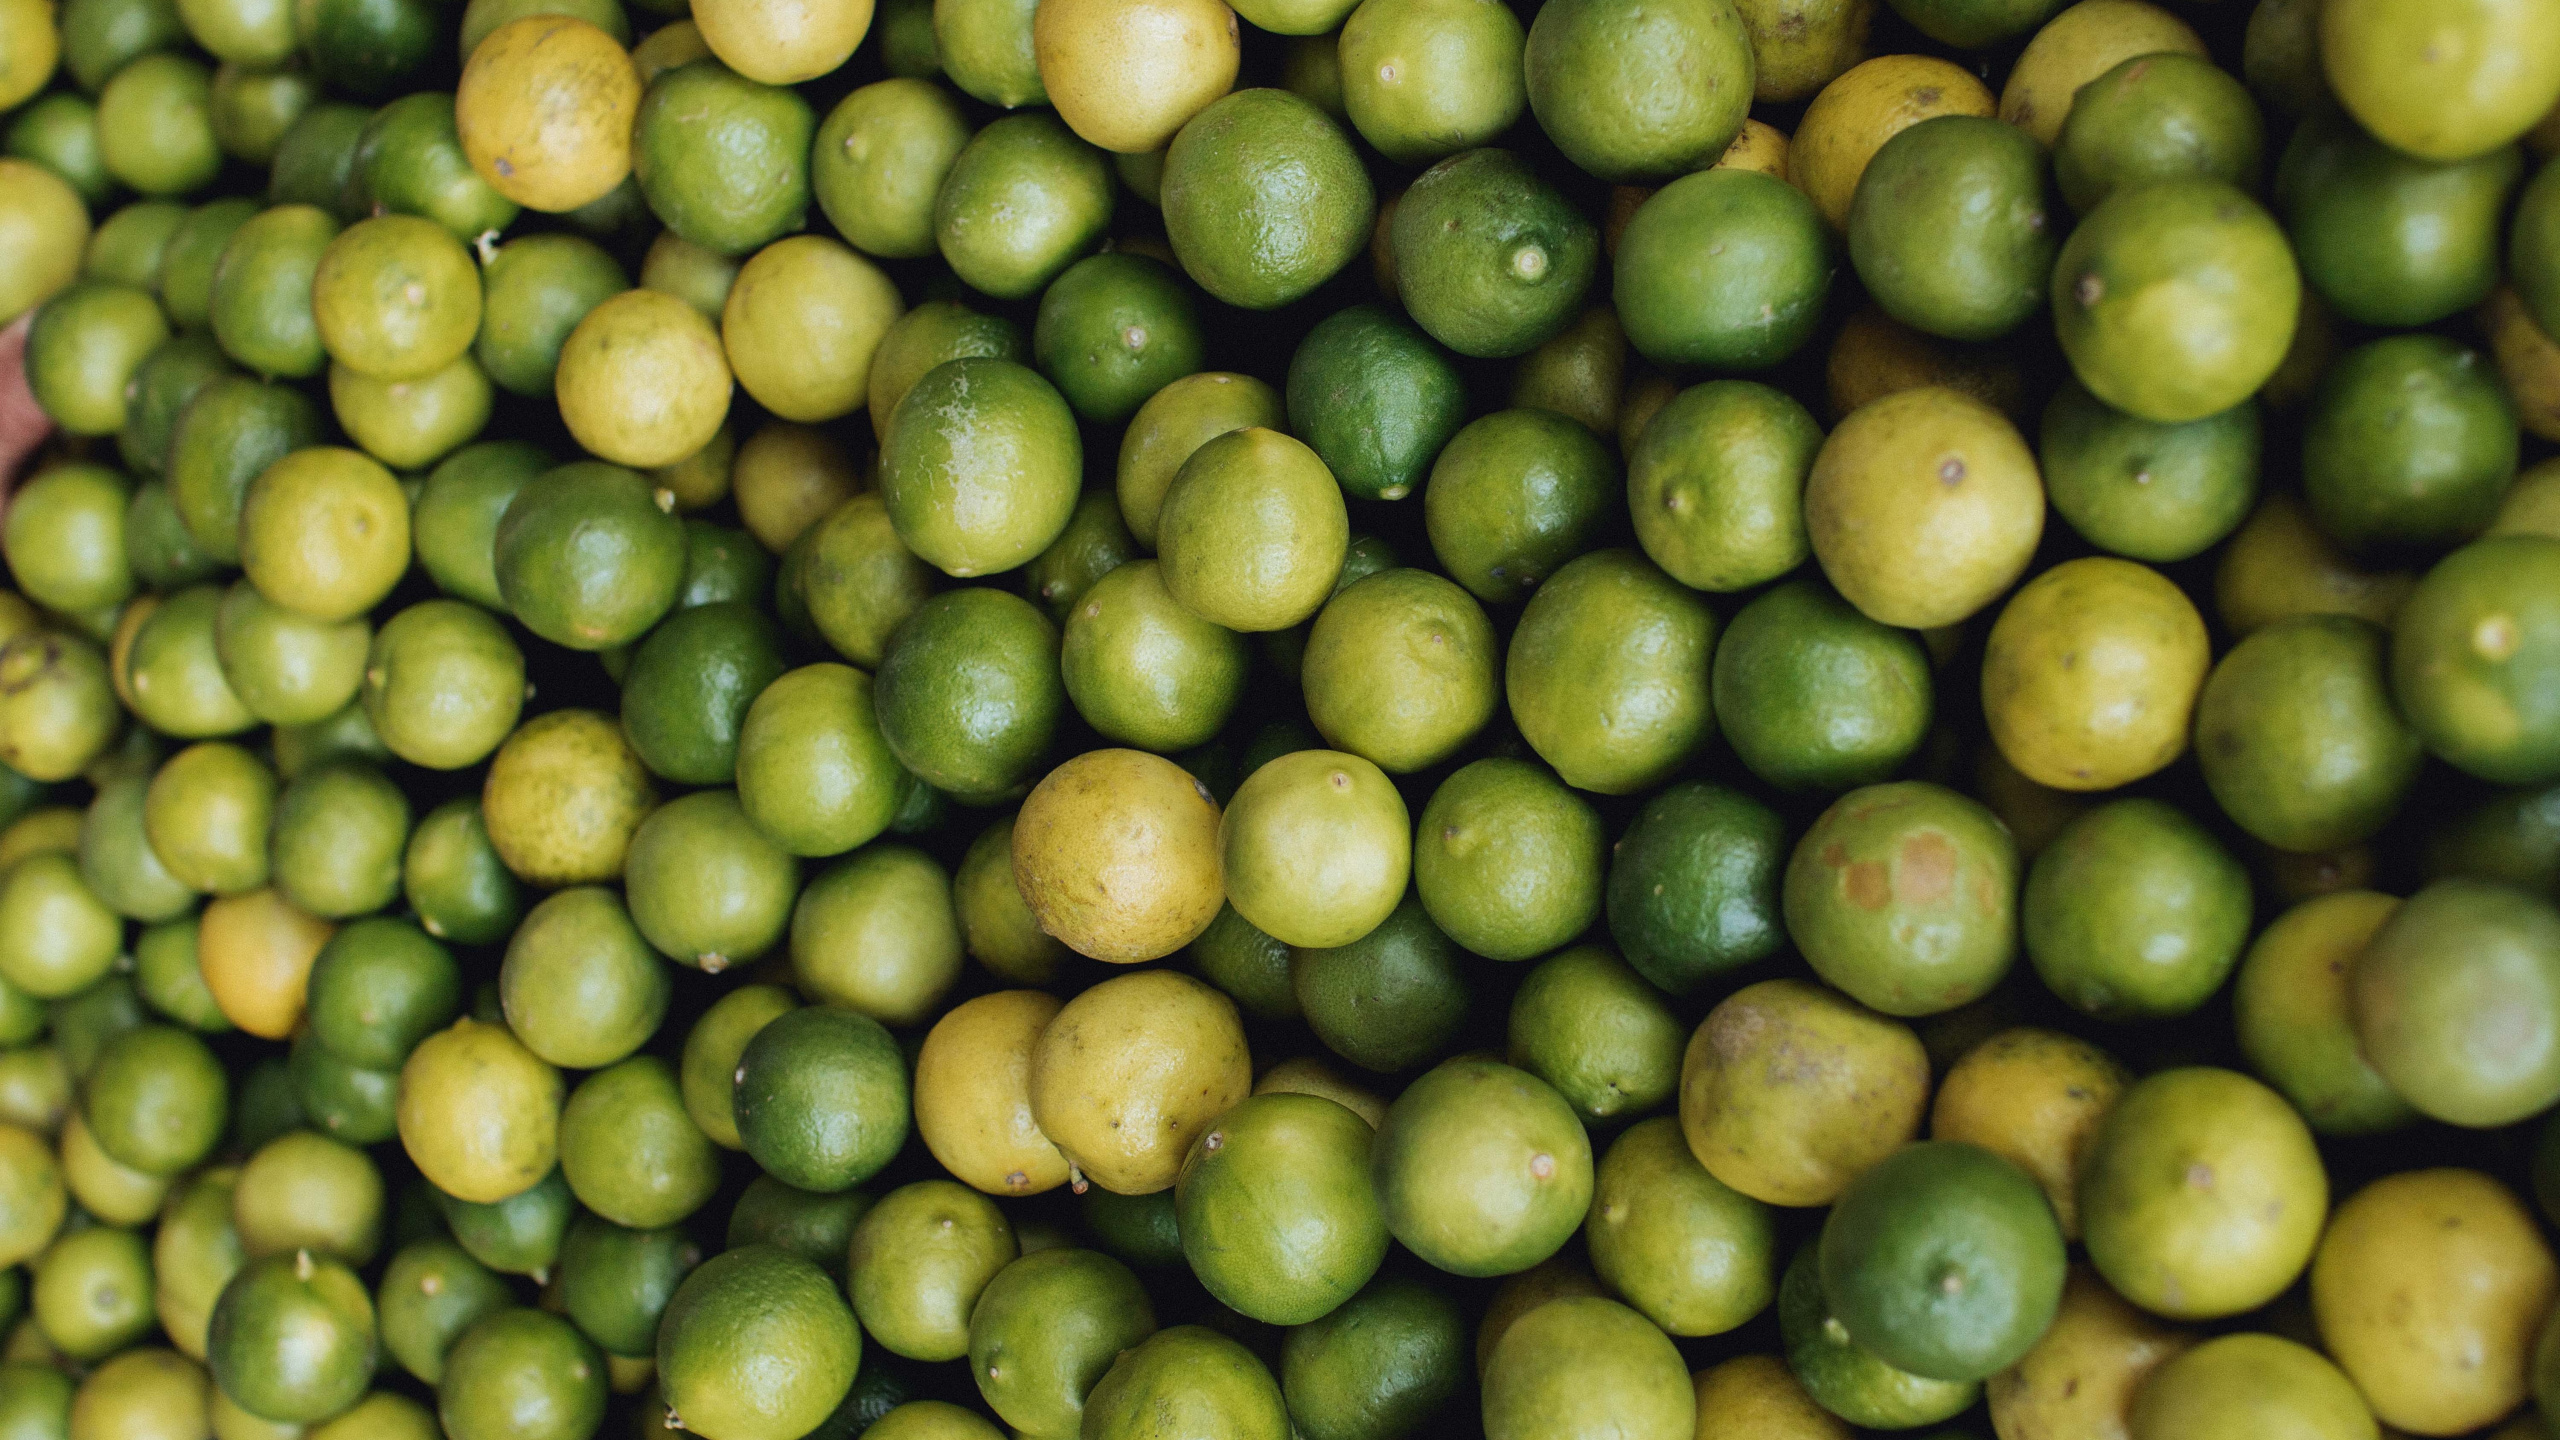 Green and Yellow Round Fruits. Wallpaper in 2560x1440 Resolution